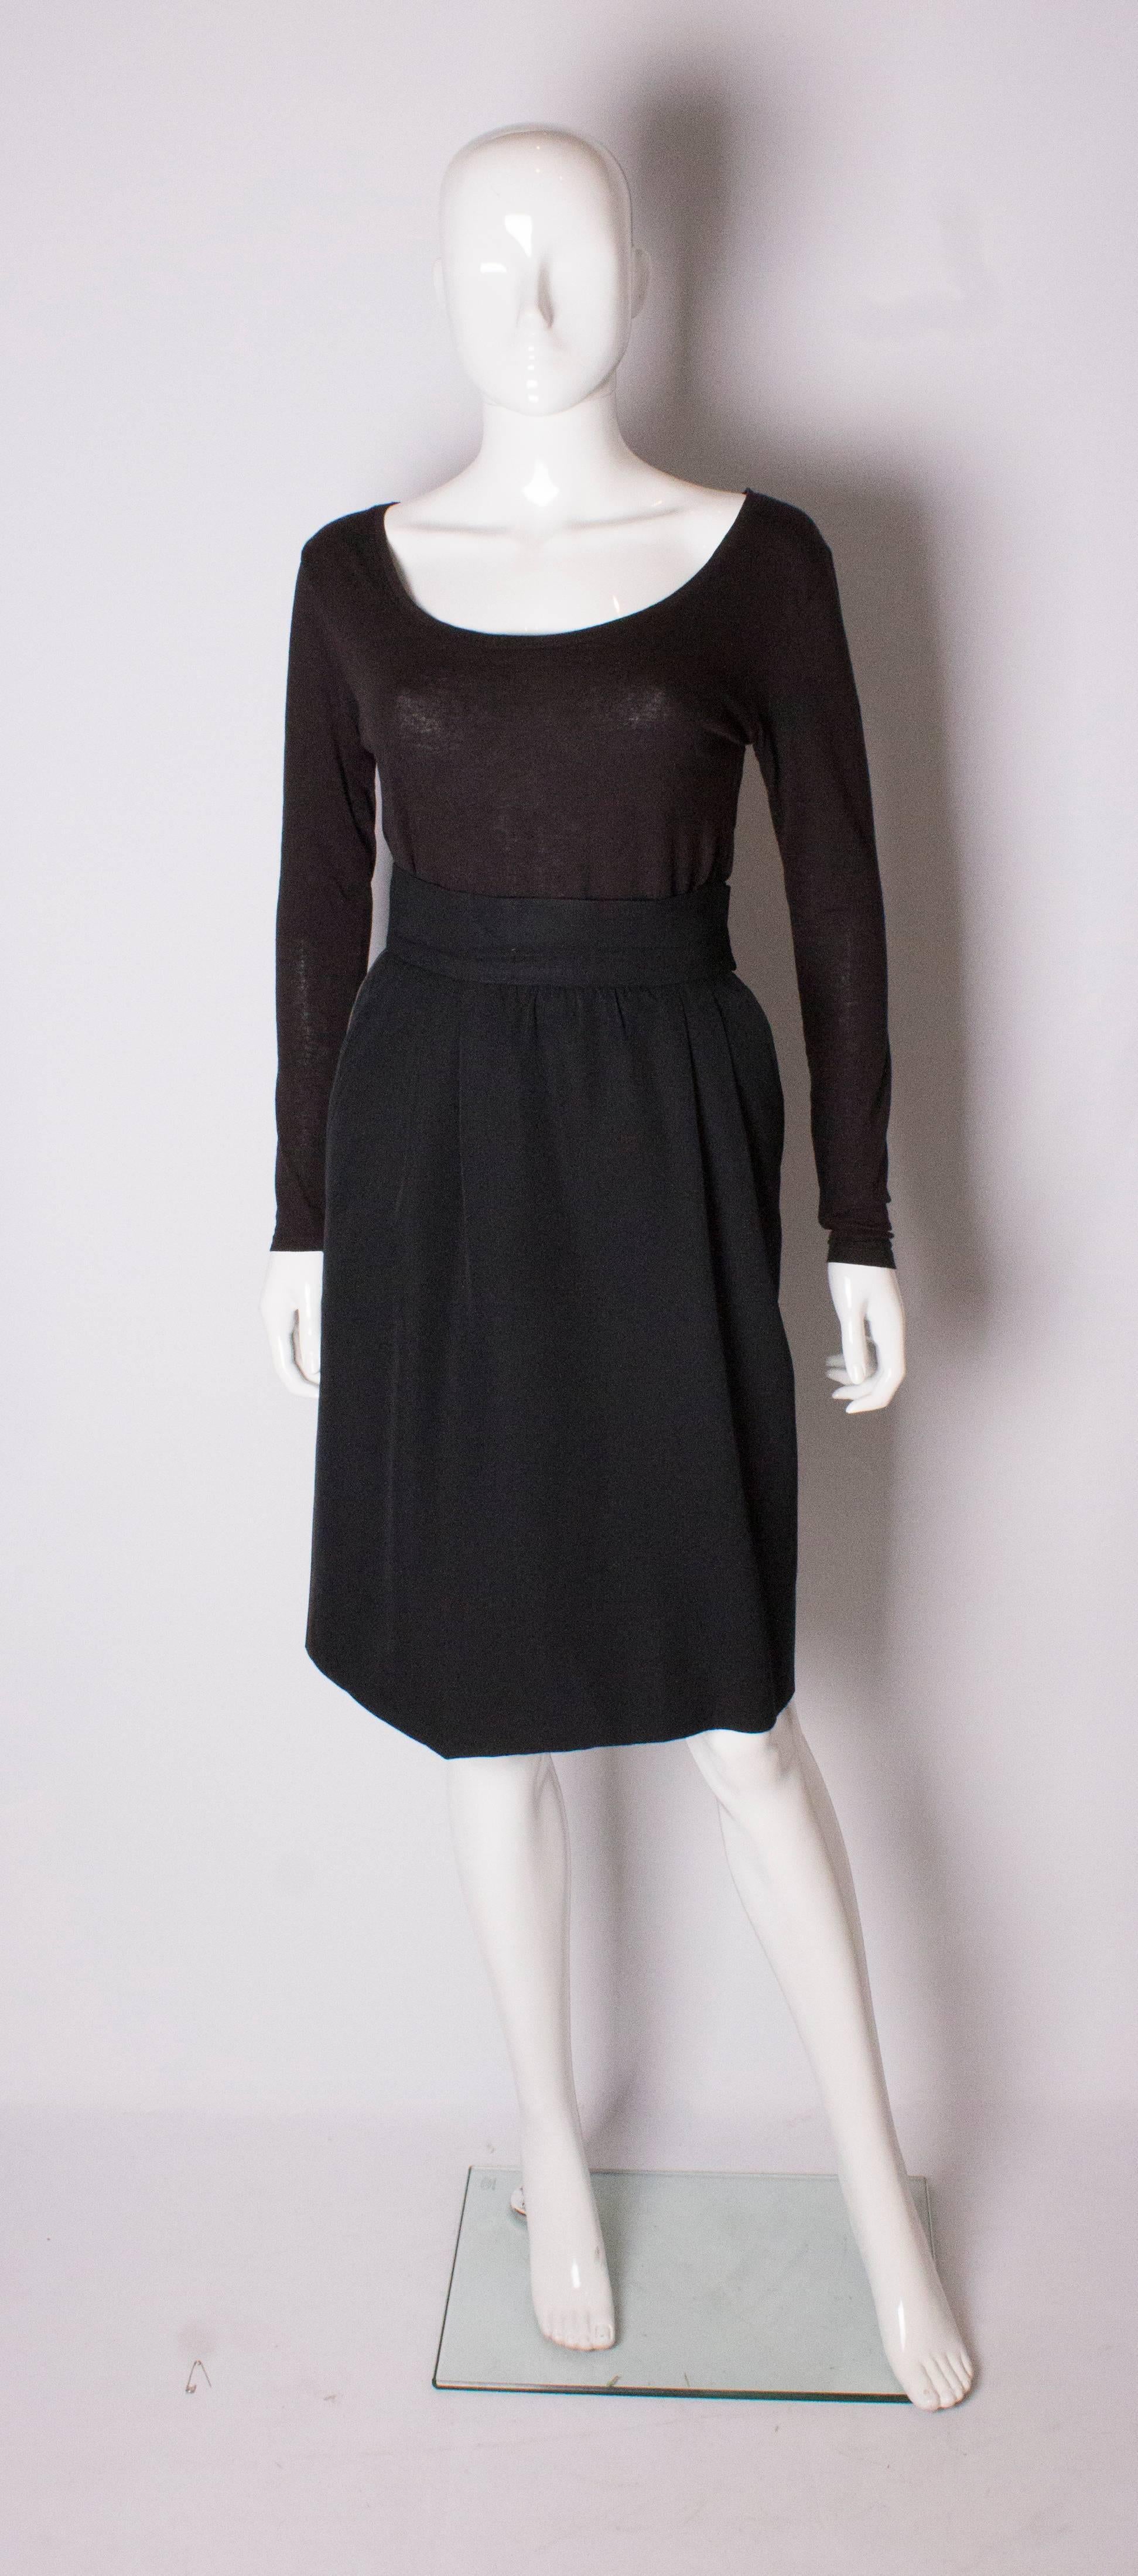 A chic vintage skirt 'Le Smoking' tuxedo  by Yves Saint Laurent Rive Gauche. The skirt is wool and fully lined, with sloping pockets and a zip on the left hand side. It has gathering on the front and ribbon detail on the left hand side.